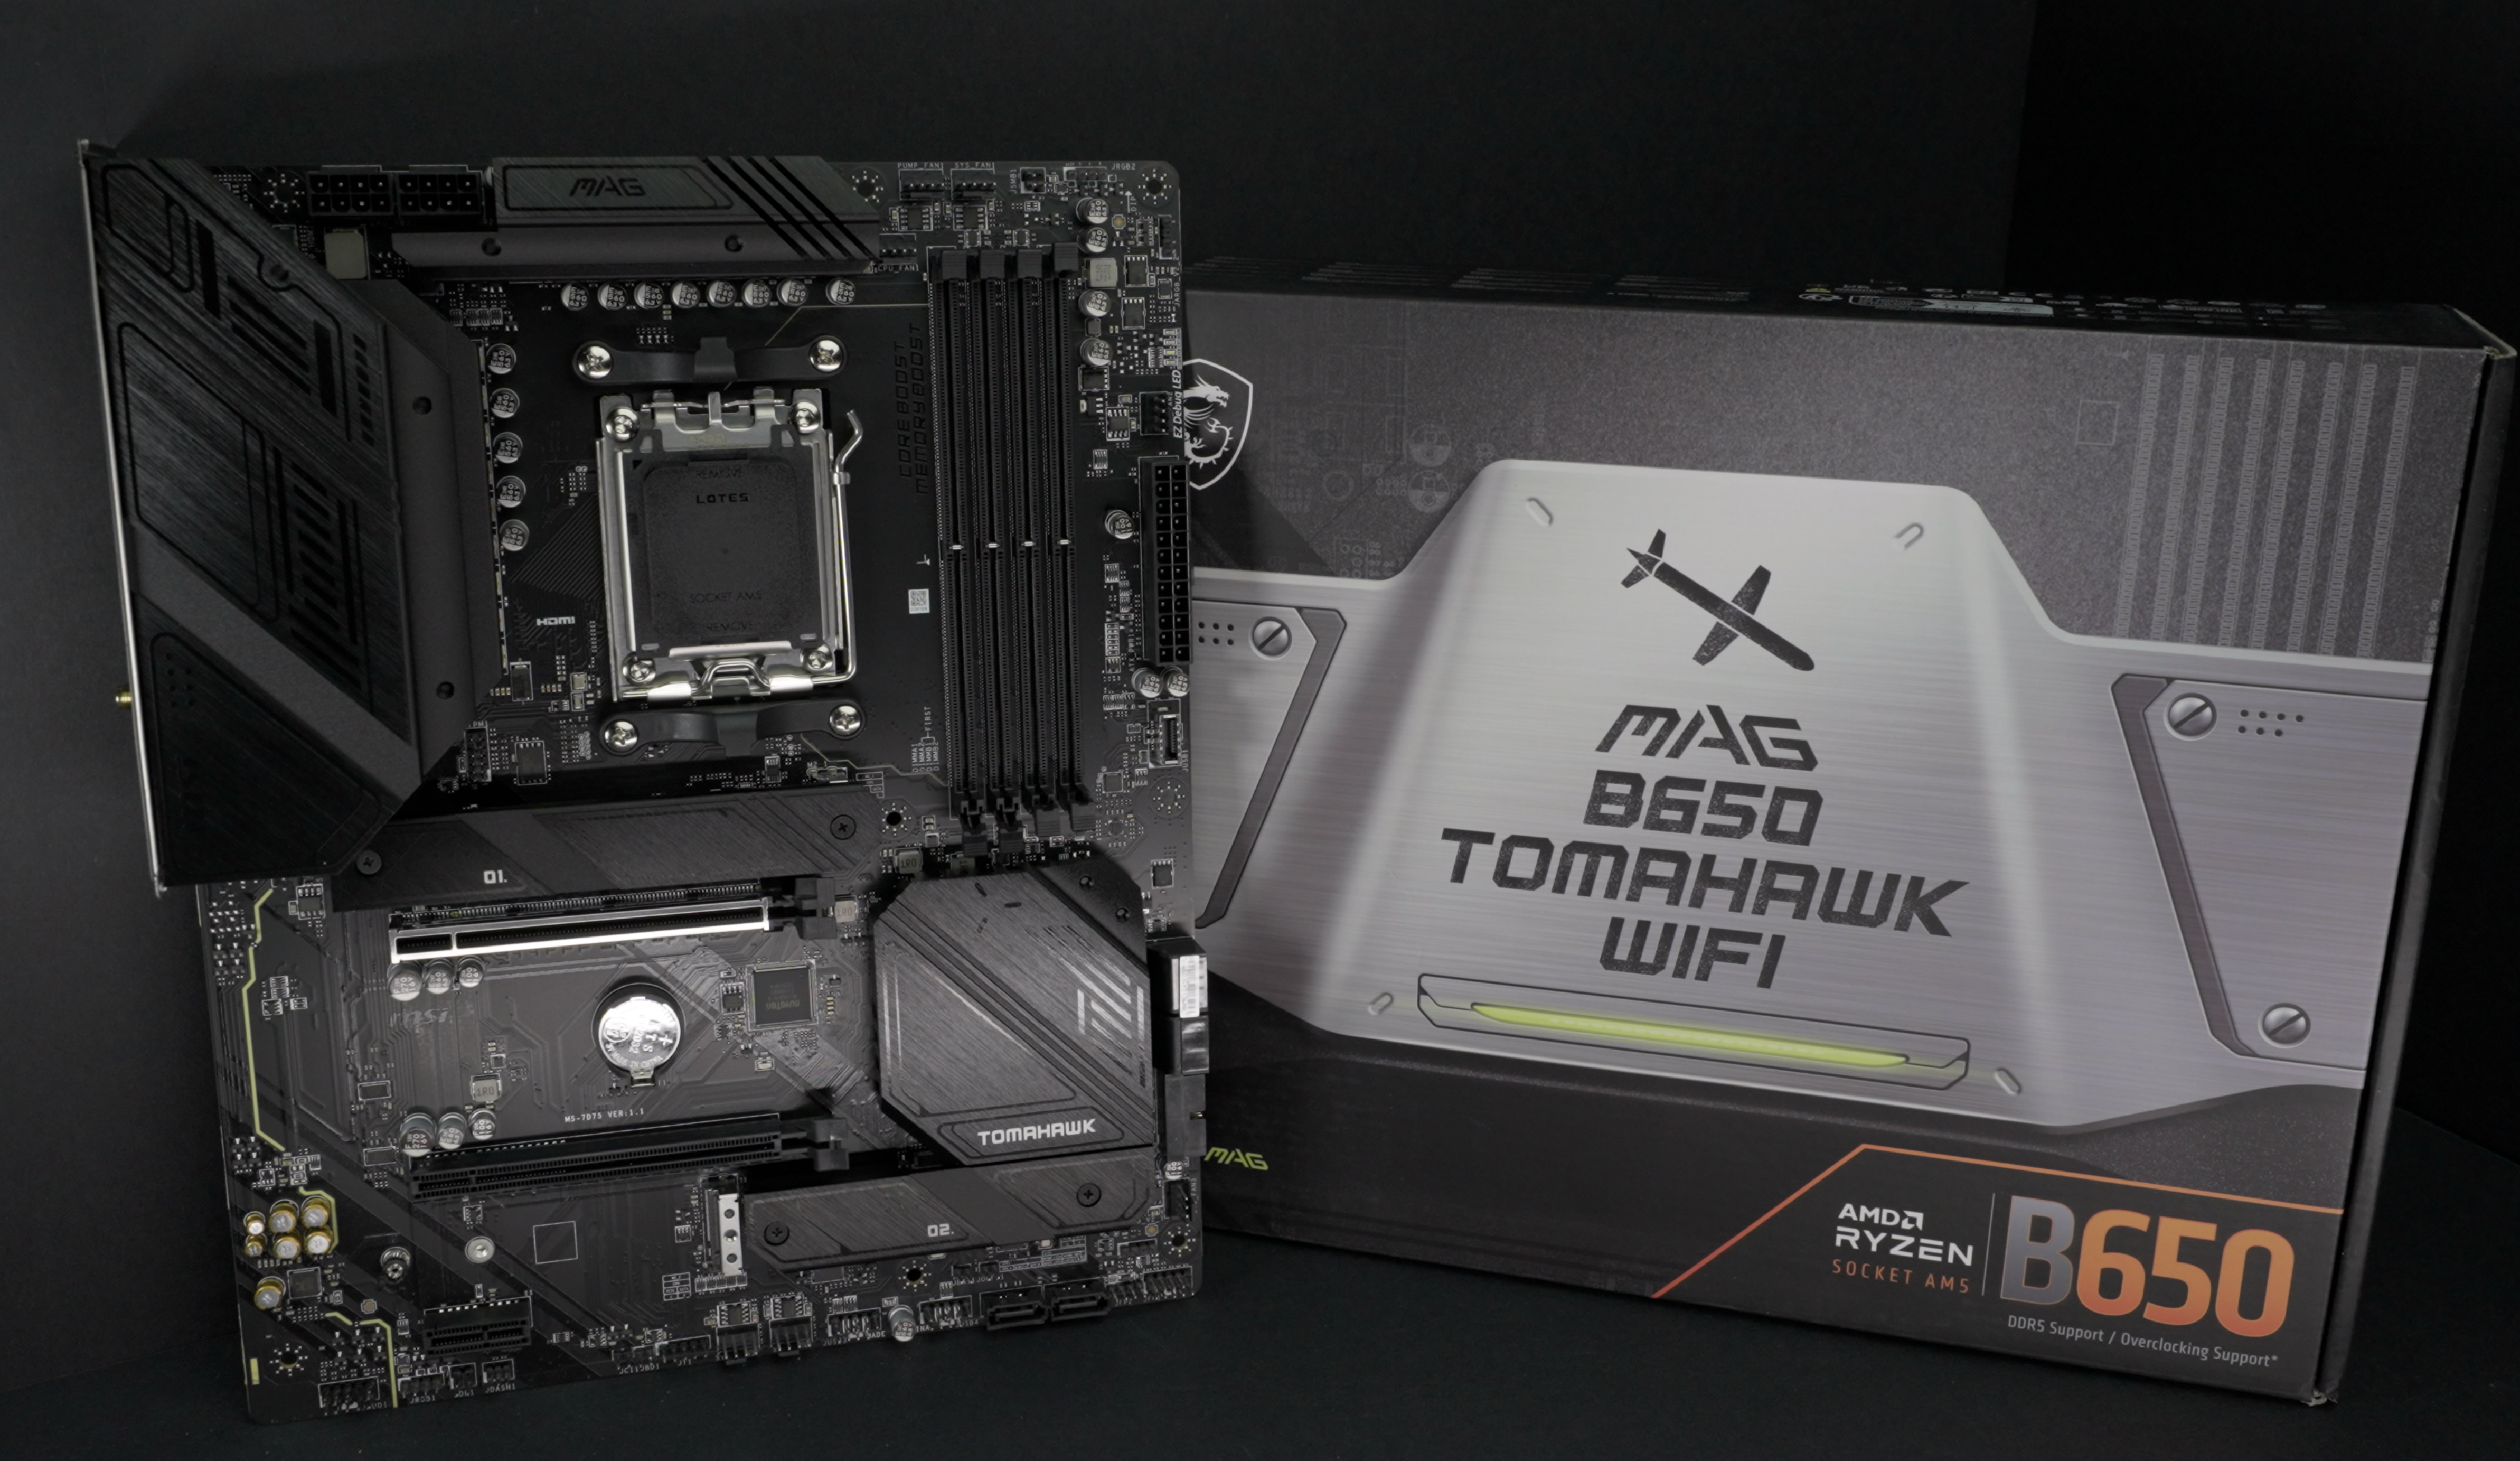 MSI MAG B650 Tomahawk WiFi - Best bang-for-the-buck AMD gaming motherboard